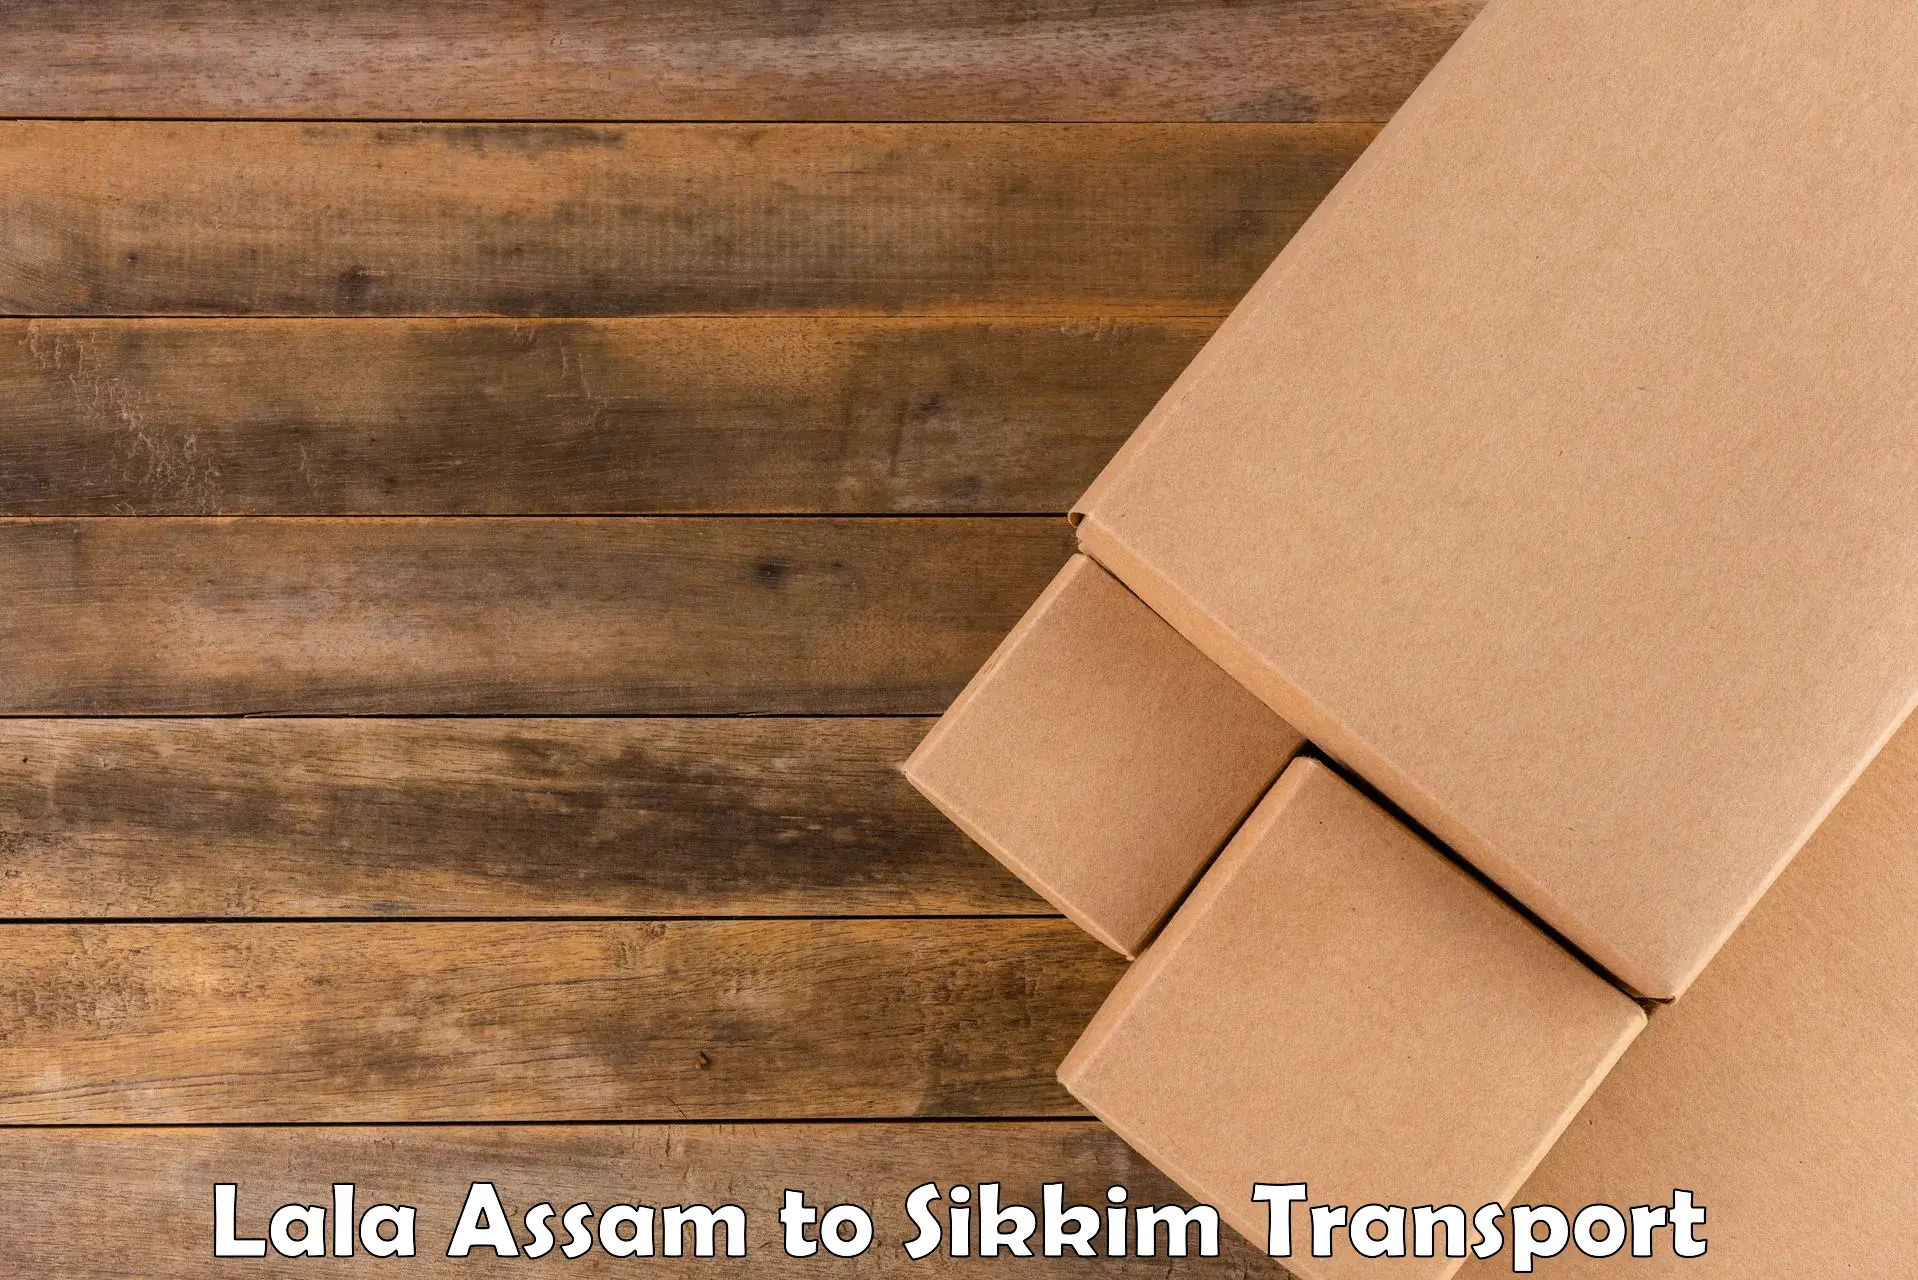 Truck transport companies in India Lala Assam to Pelling